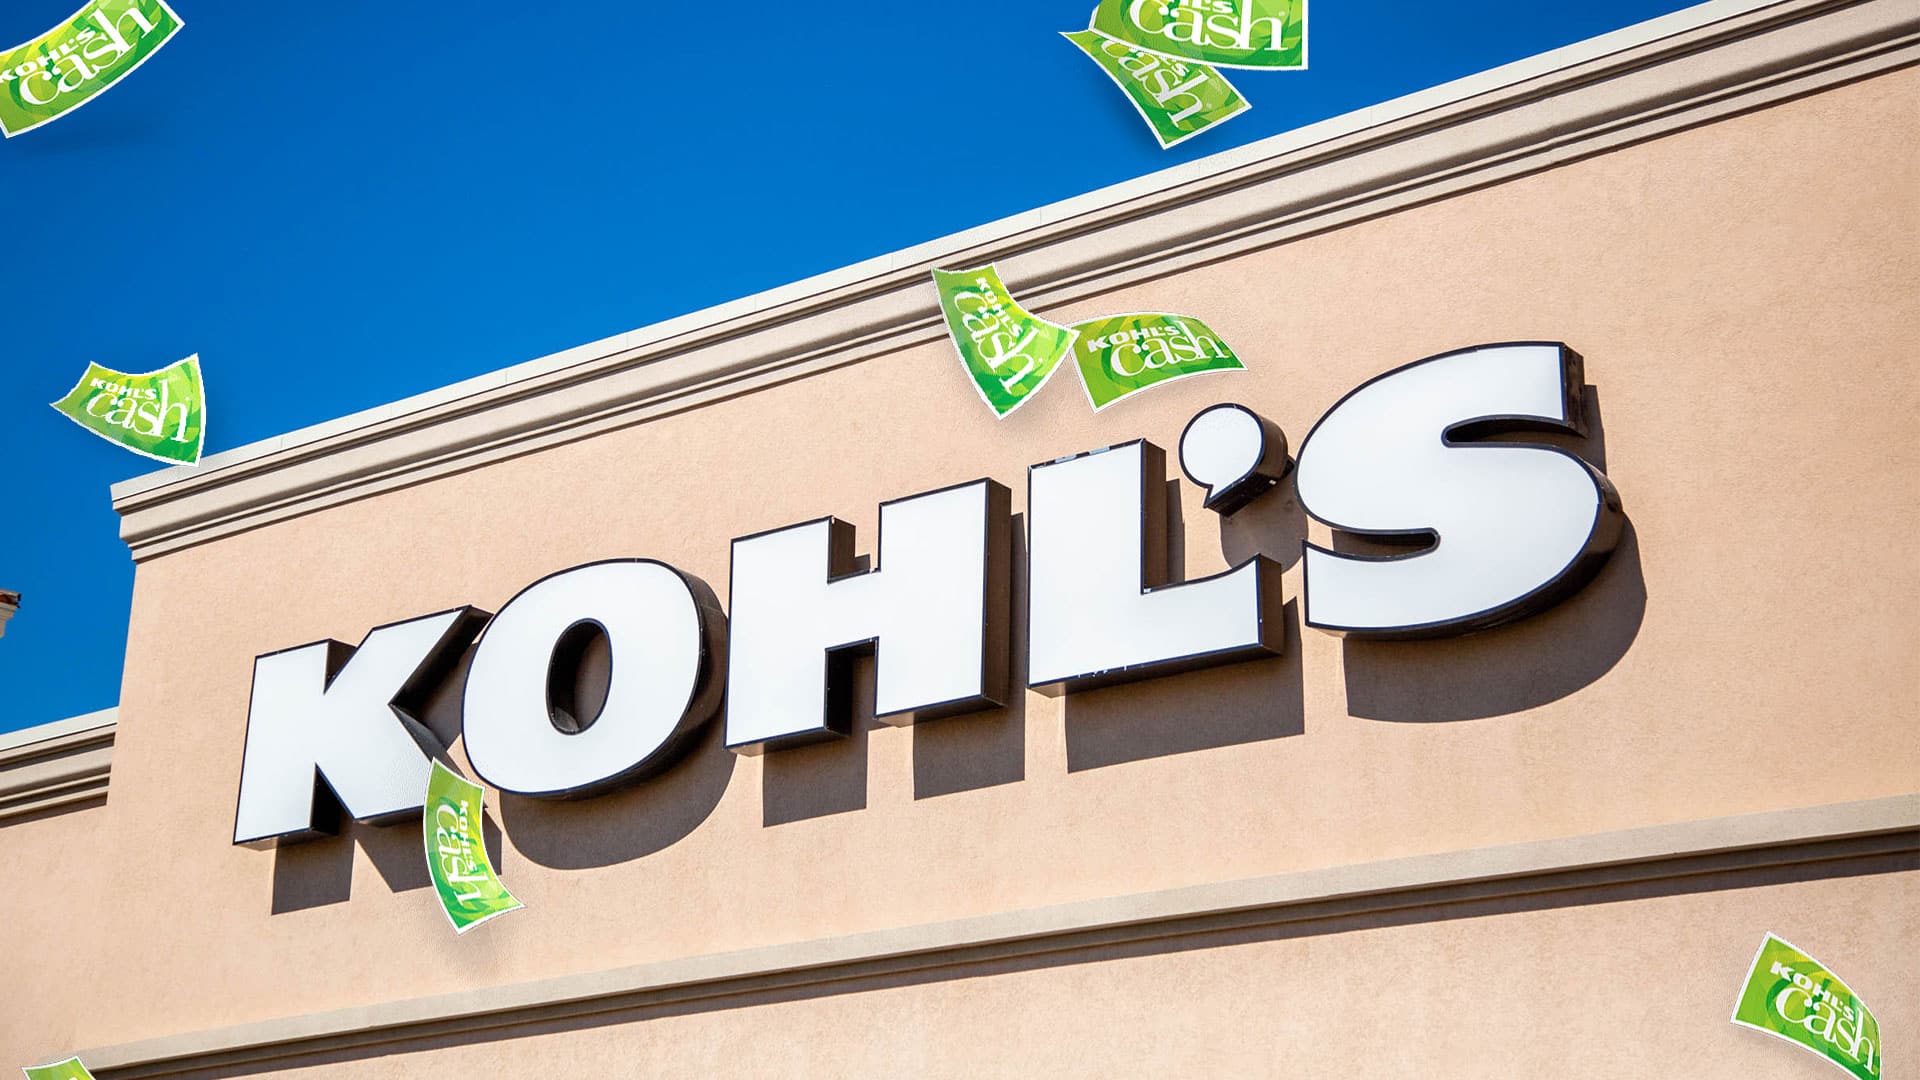 Kohl's Storefront sign with kohl's cash raining down.